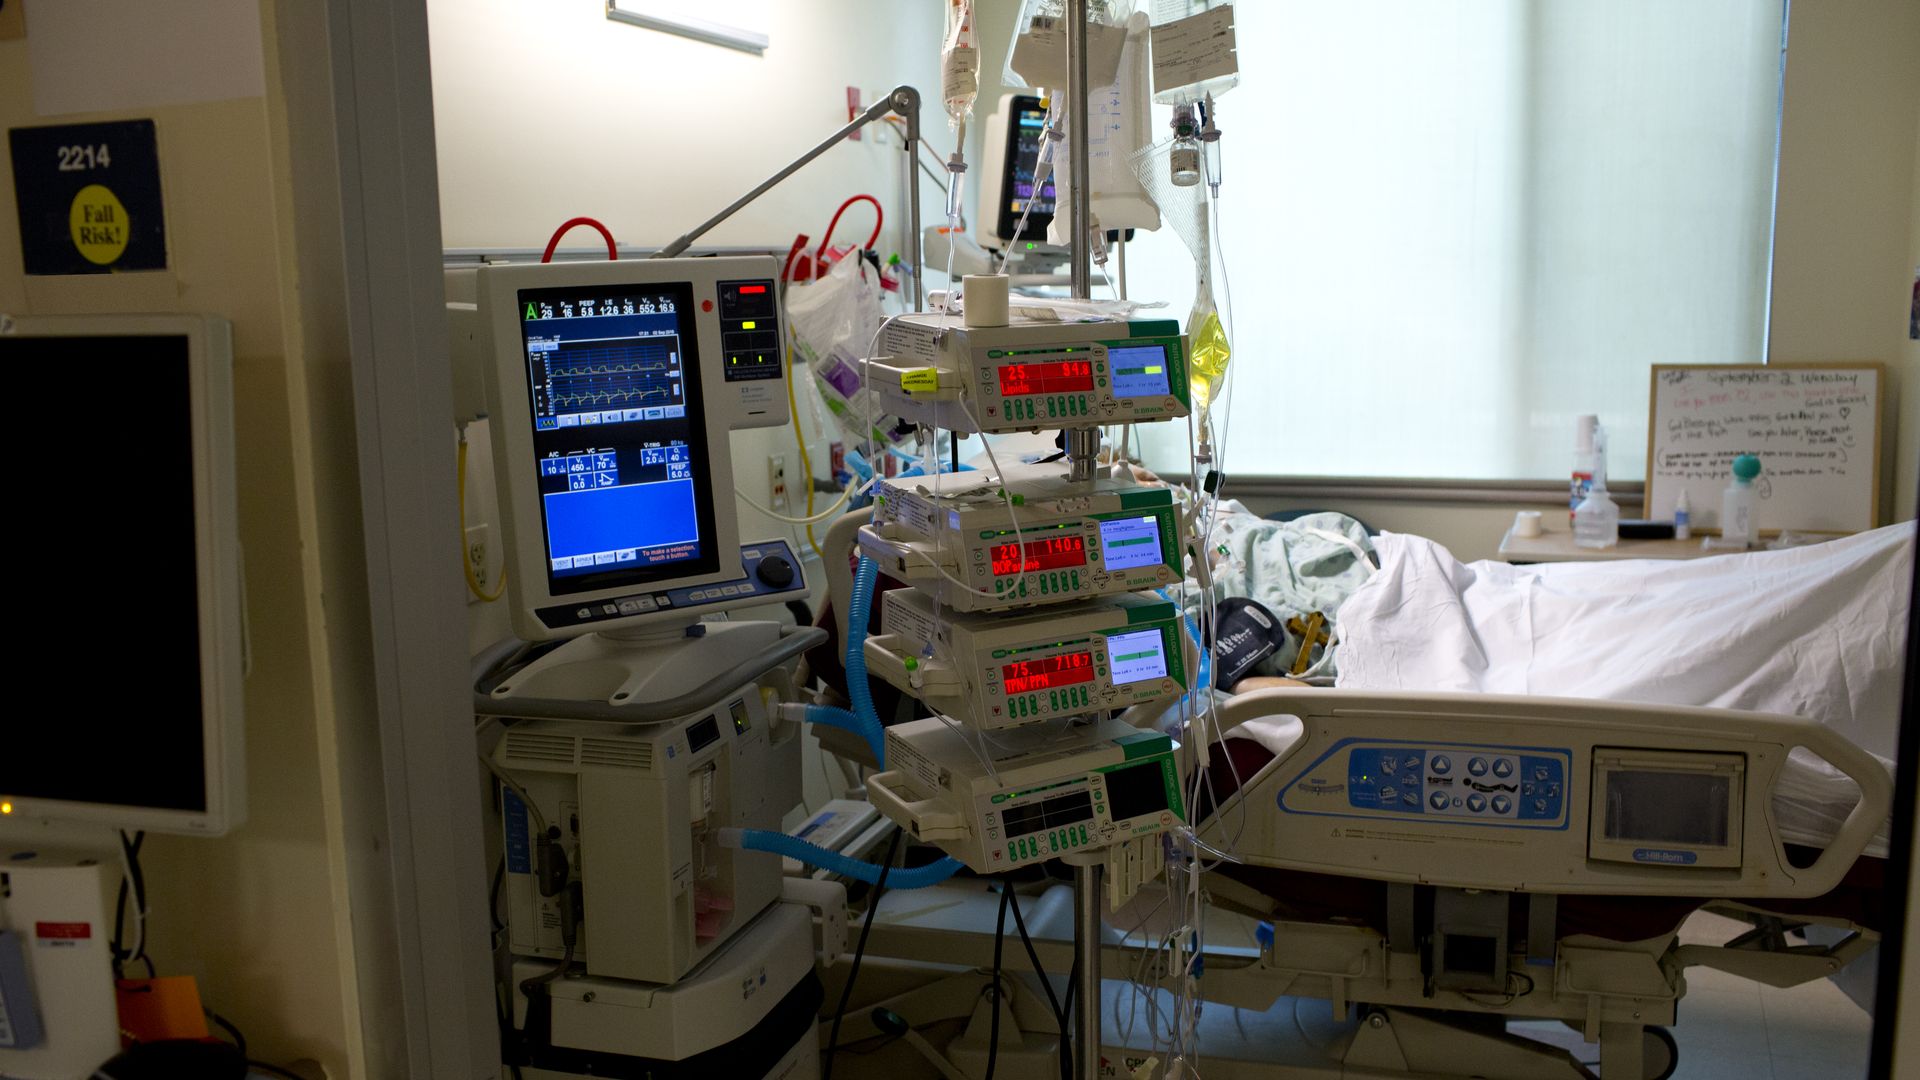 A patient sits in a hospital bed with machines nearby.